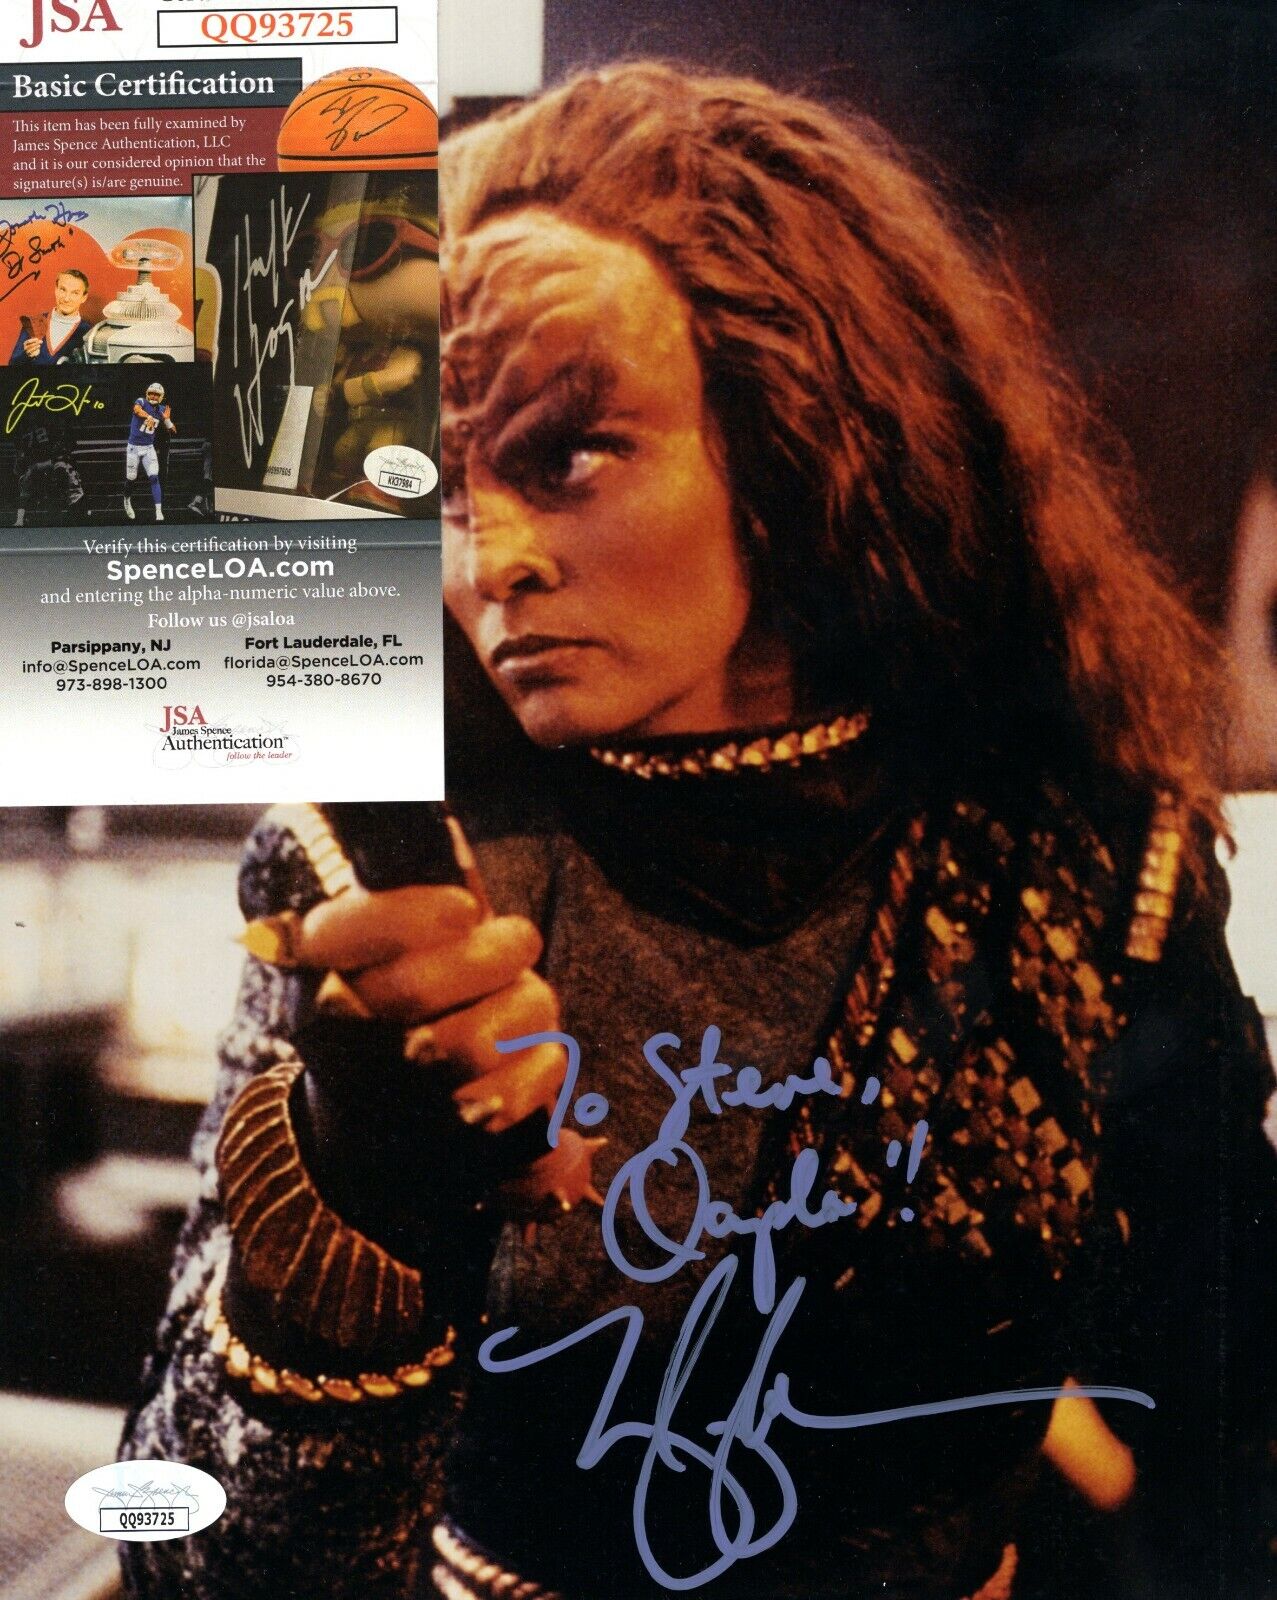 Mary Kay Adams Deep Space 9 Actress Hand Signed Autograph 8x10 Photo Poster painting w/ JSA COA